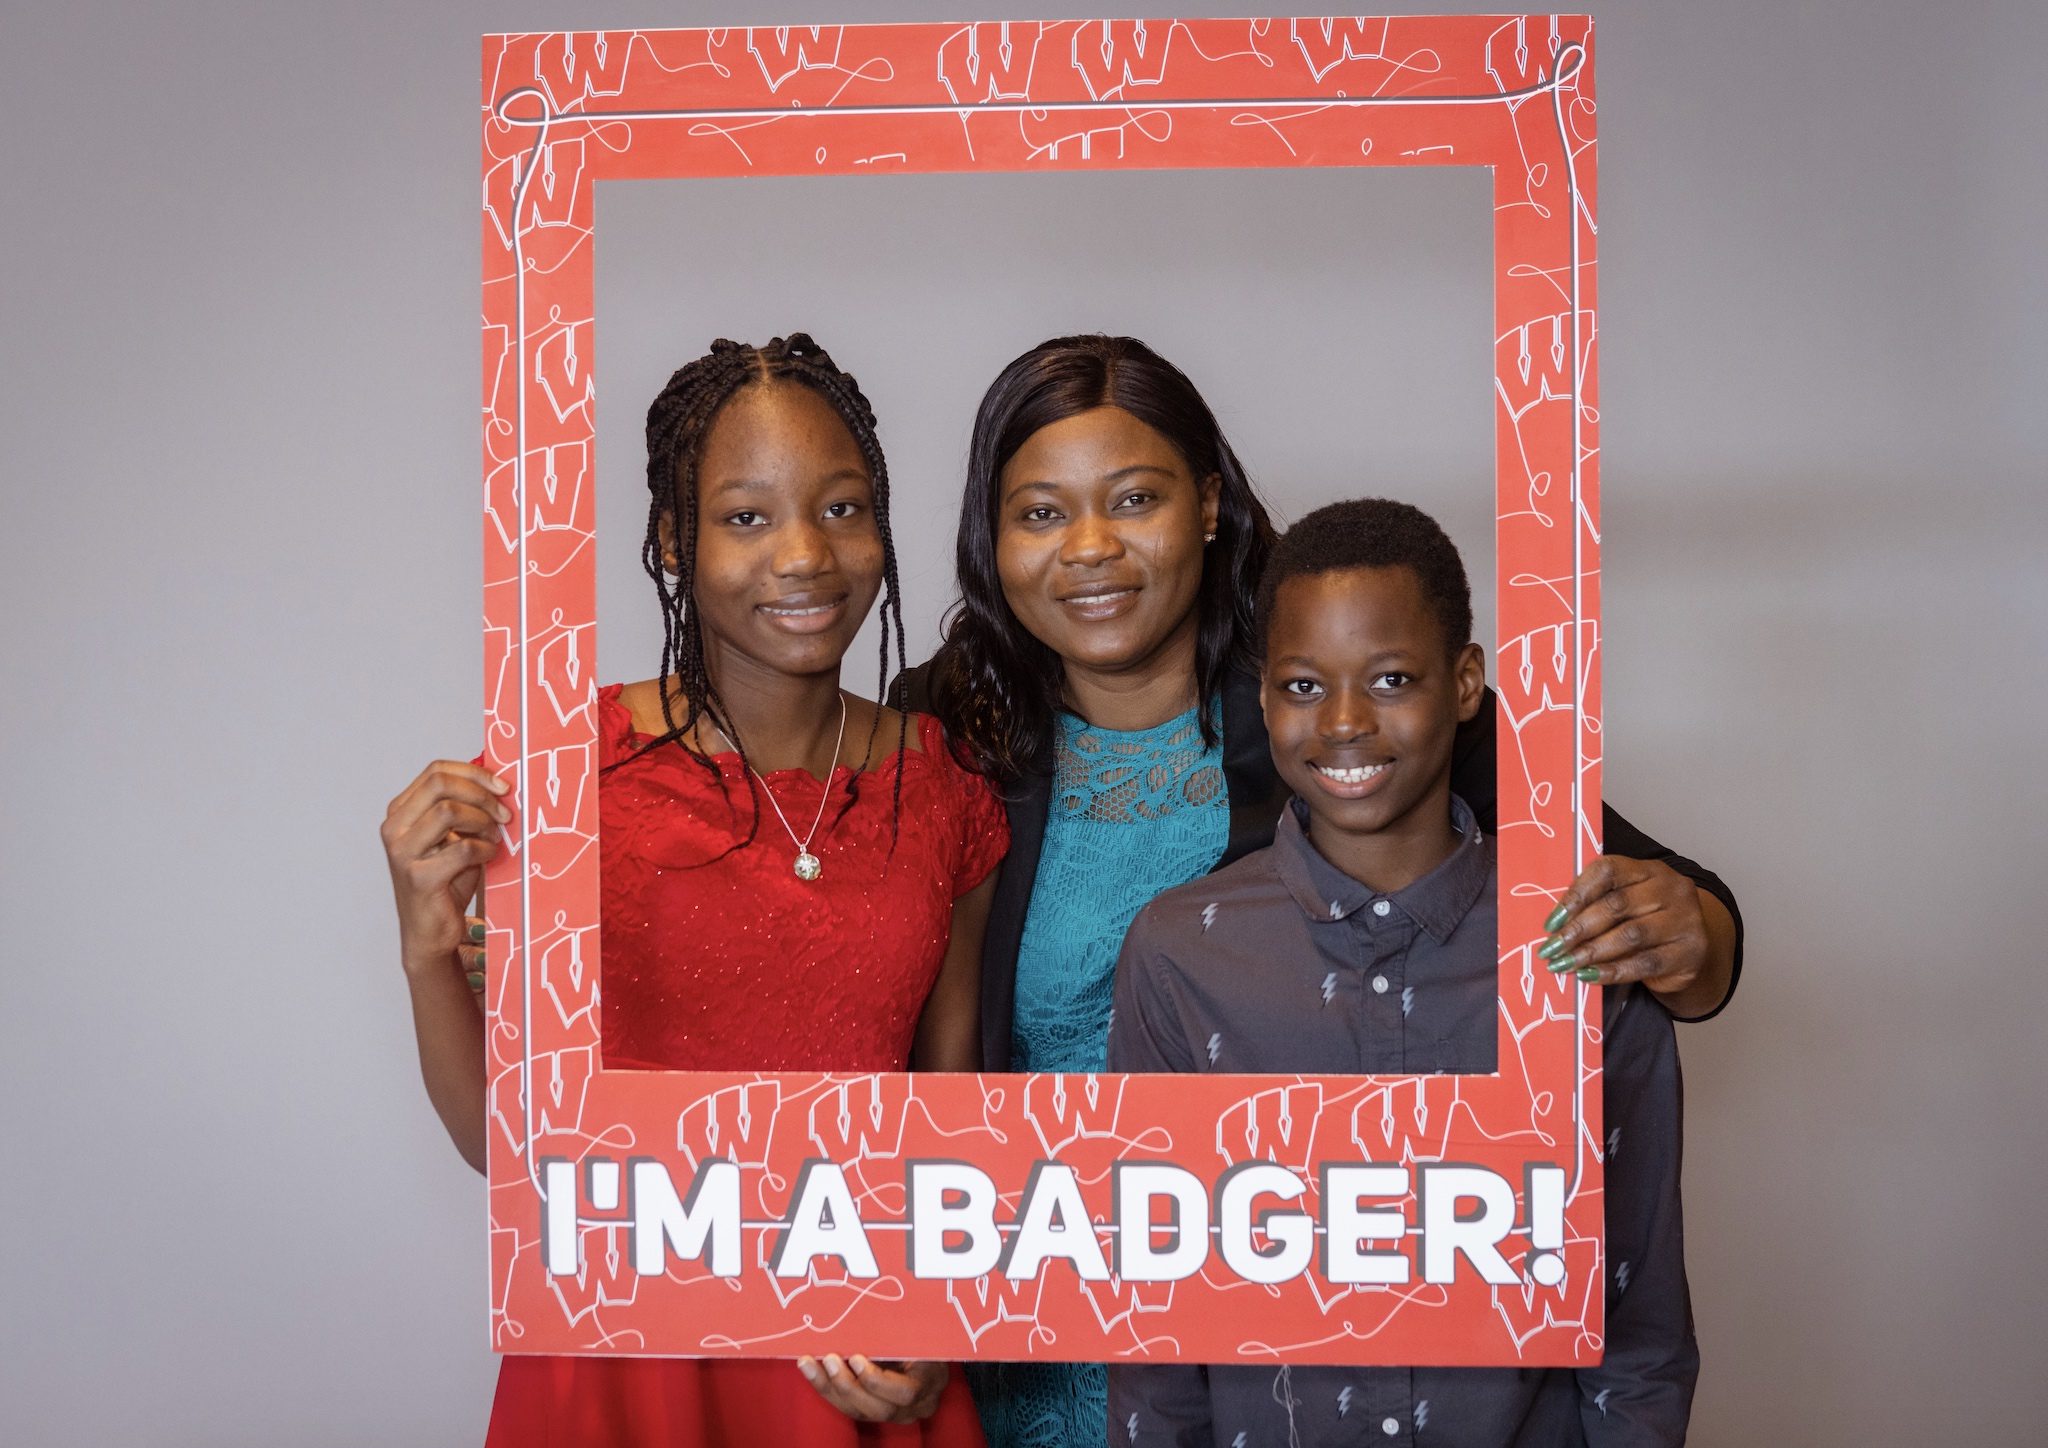 A woman and her two kids standing behind a sign that says "I'm A Badger."